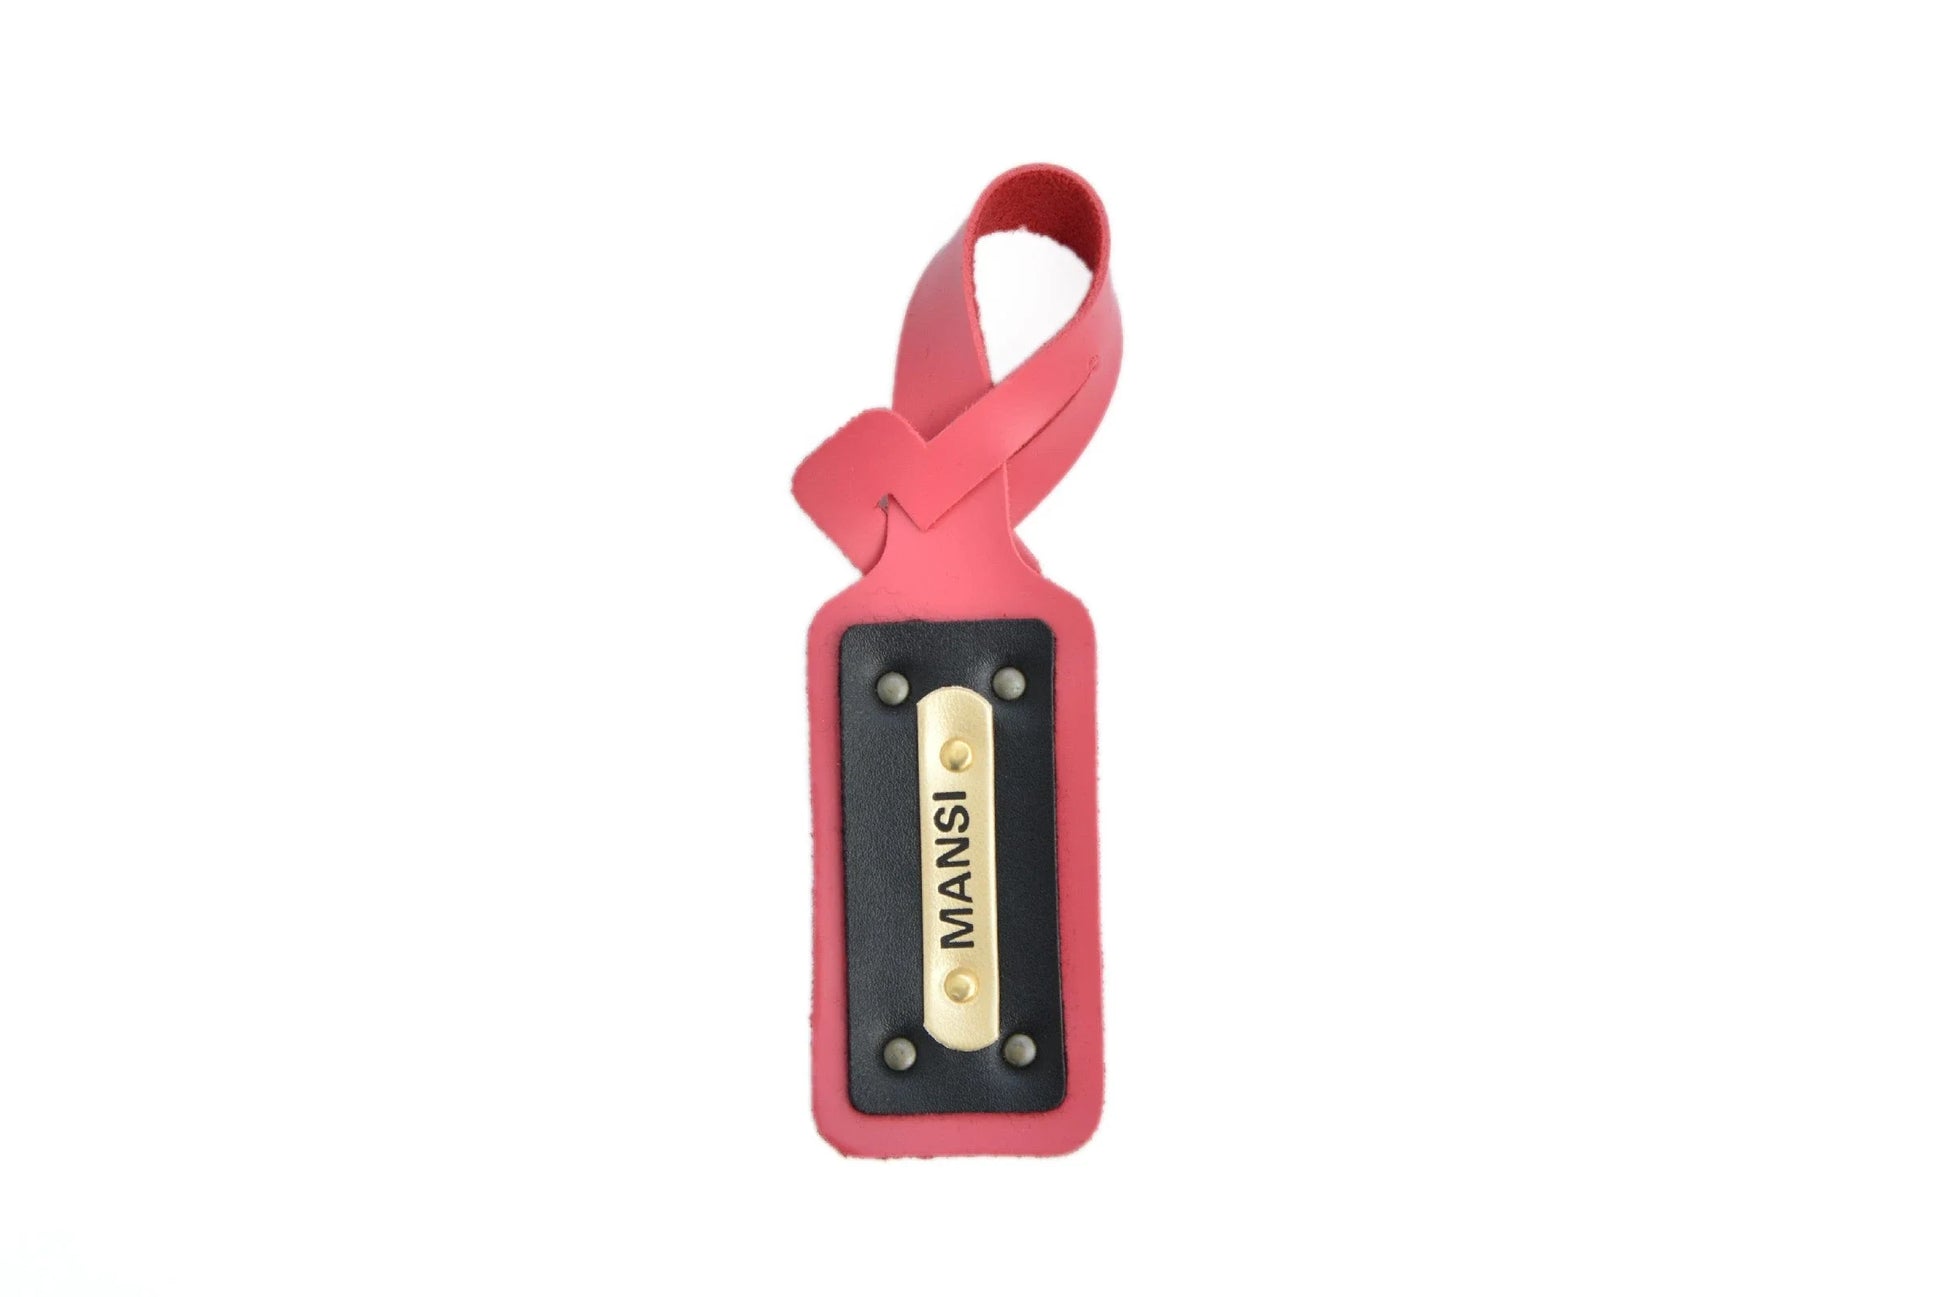 Keep Your Bags Easily Identifiable with the Vibrant and Customized Luggage Tag.